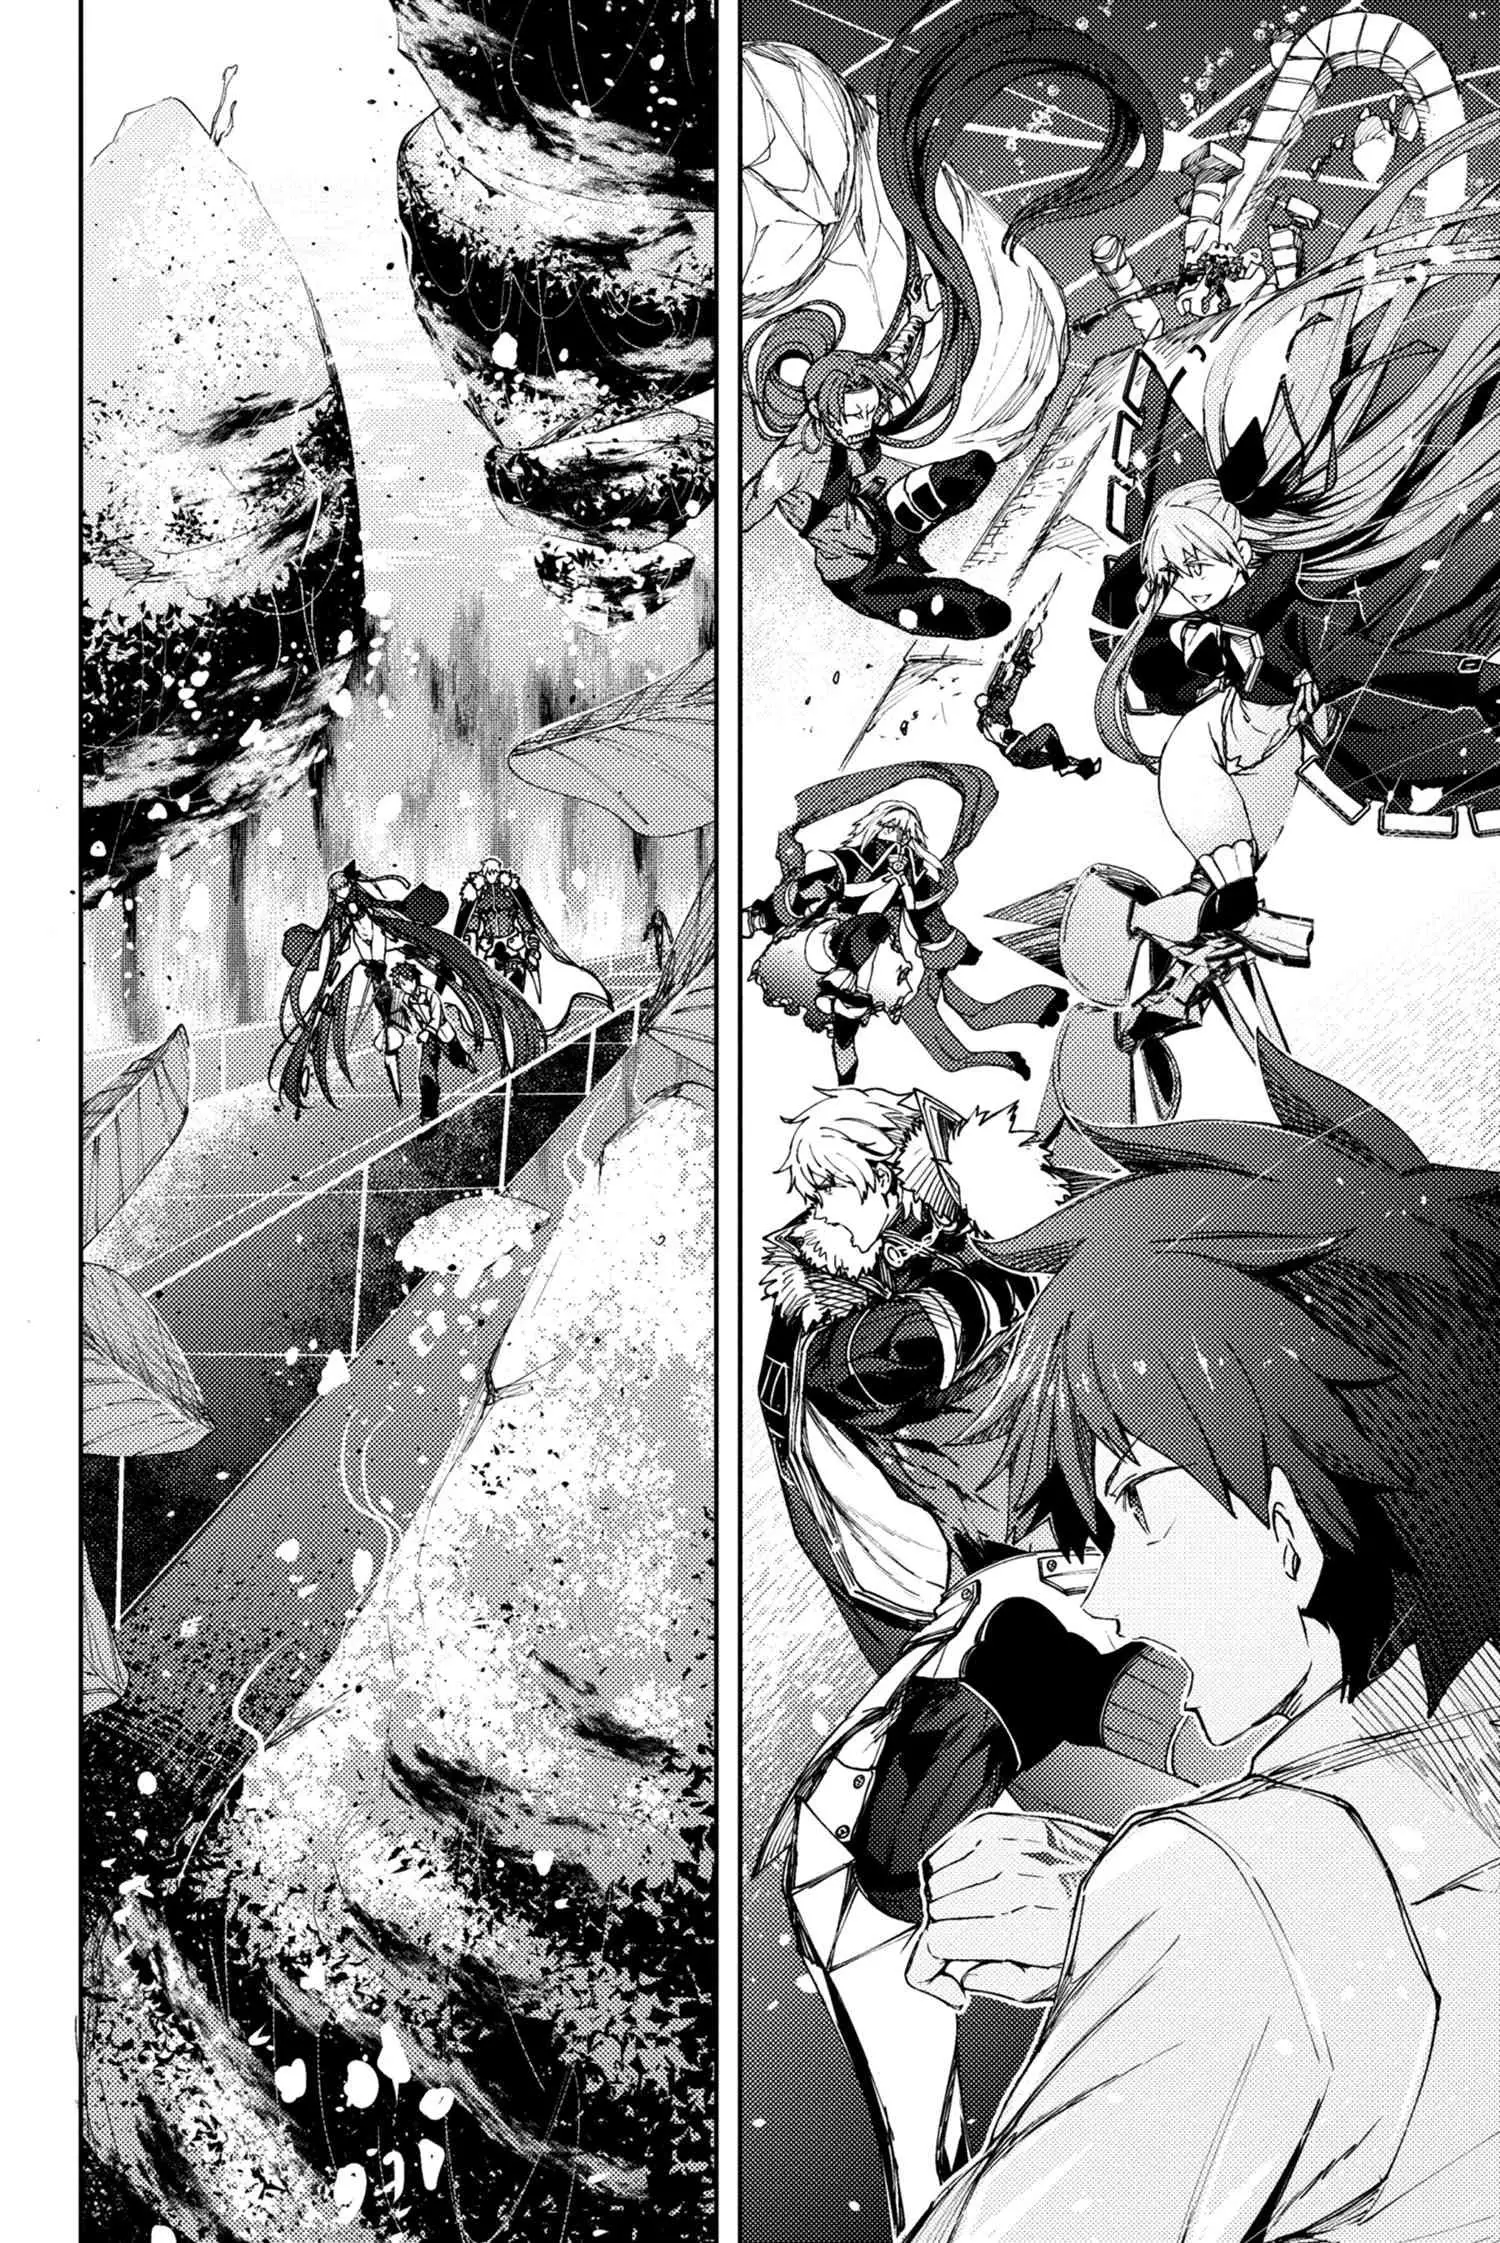 Fate/grand Order -Epic Of Remnant- Deep Sea Cyber-Paradise Se.ra.ph - 11.2 page 15